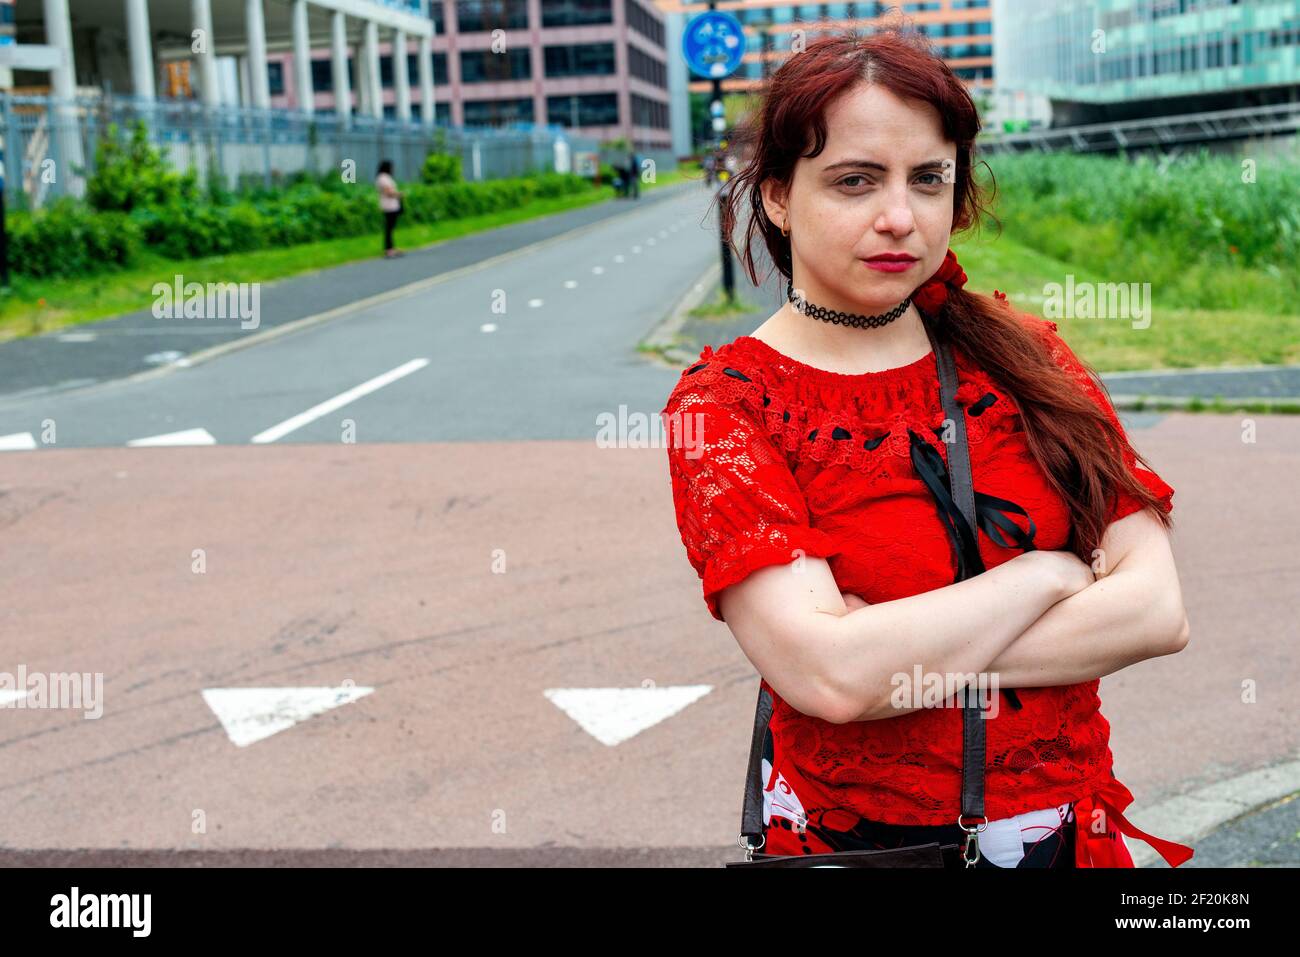 Amsterdam, Netherlands. Streetportrait of a young, redhaired woman. Stock Photo